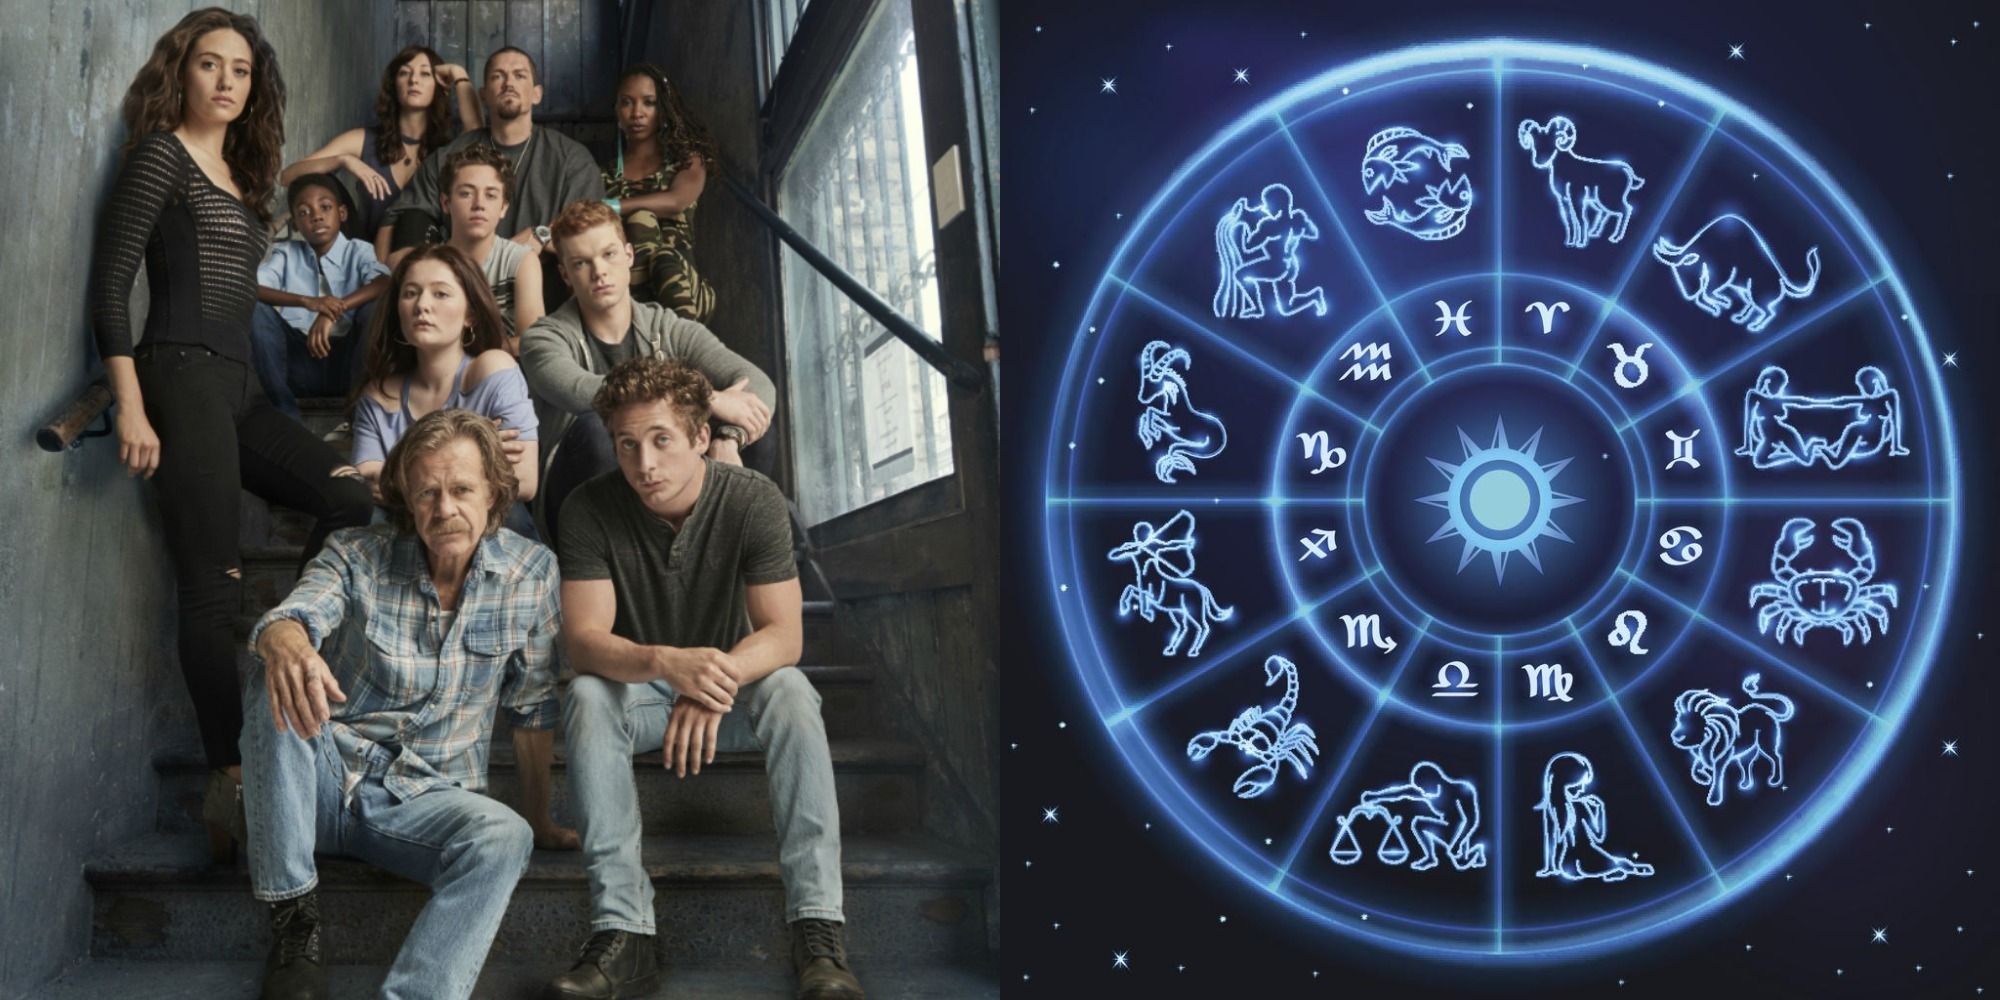 A split image of the Shameless cast and the zodiac wheel